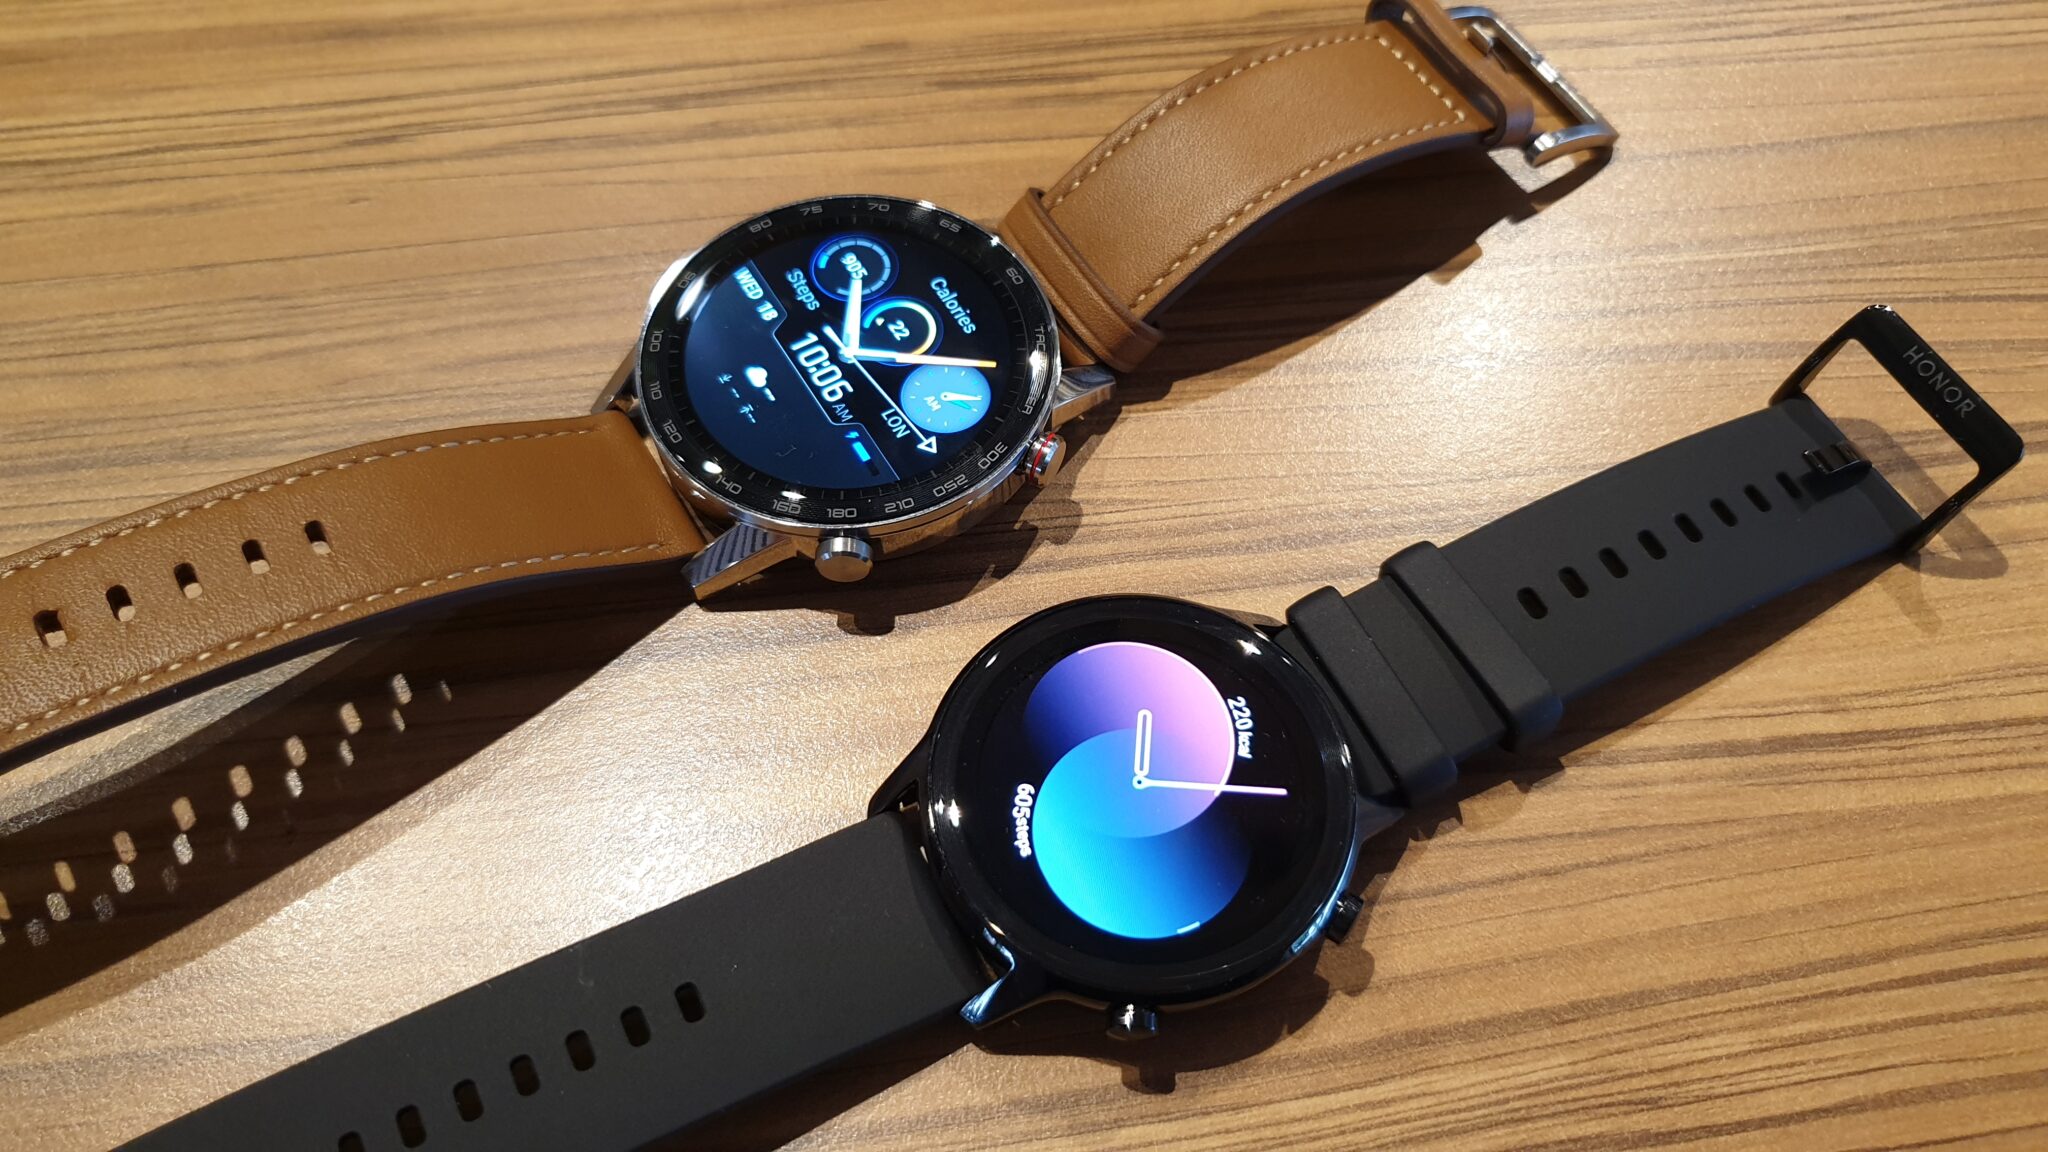 HONOR MagicWatch 2 top